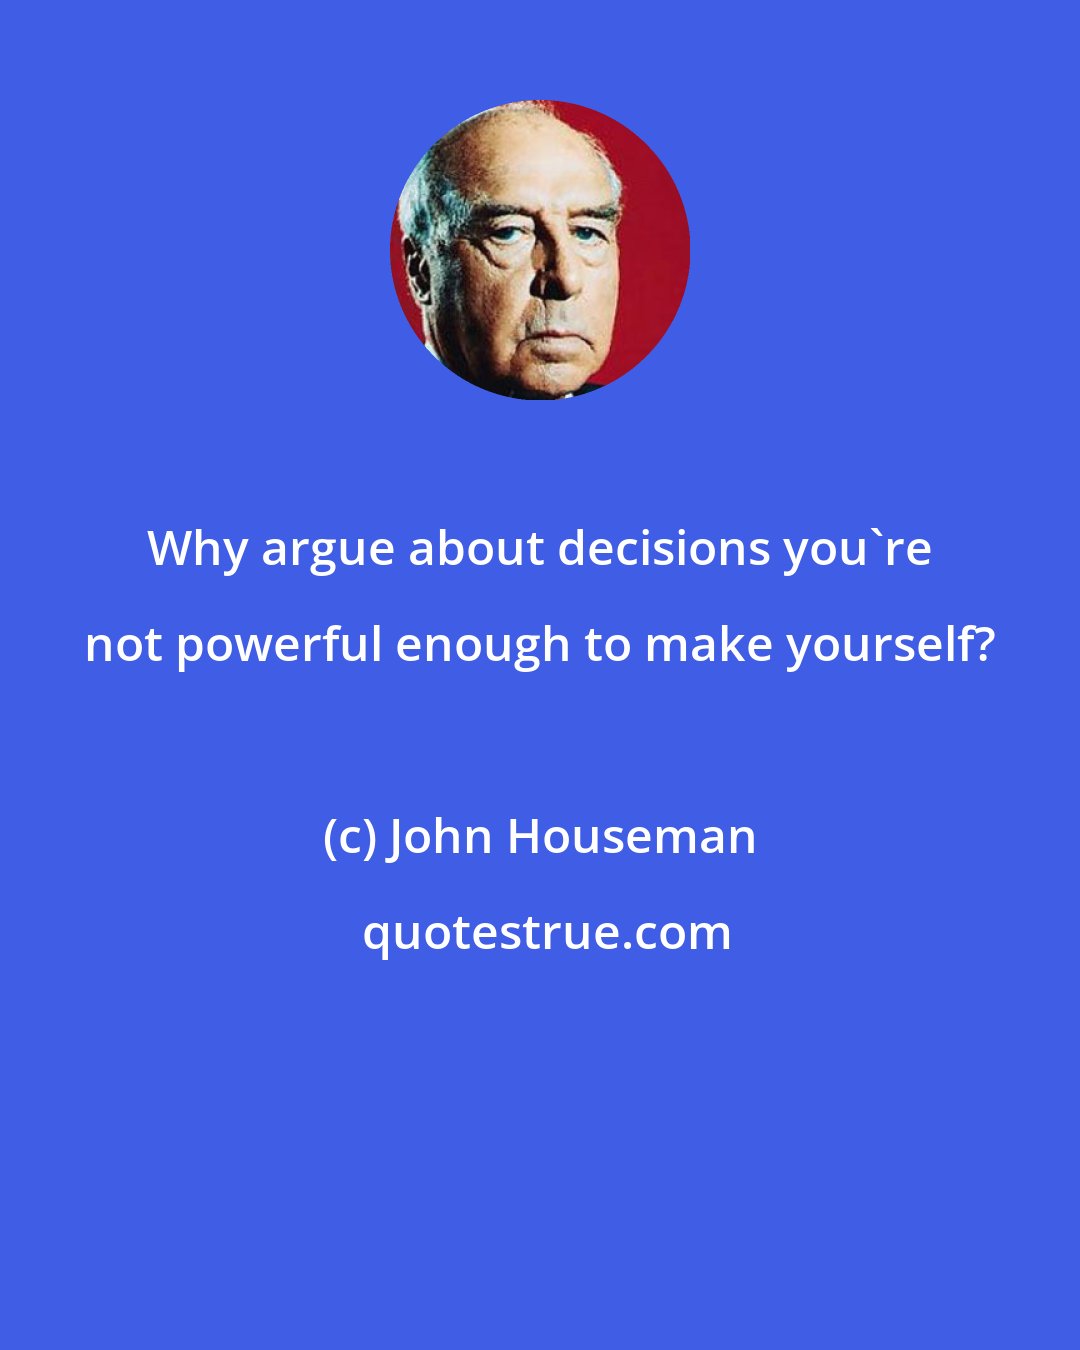 John Houseman: Why argue about decisions you're not powerful enough to make yourself?